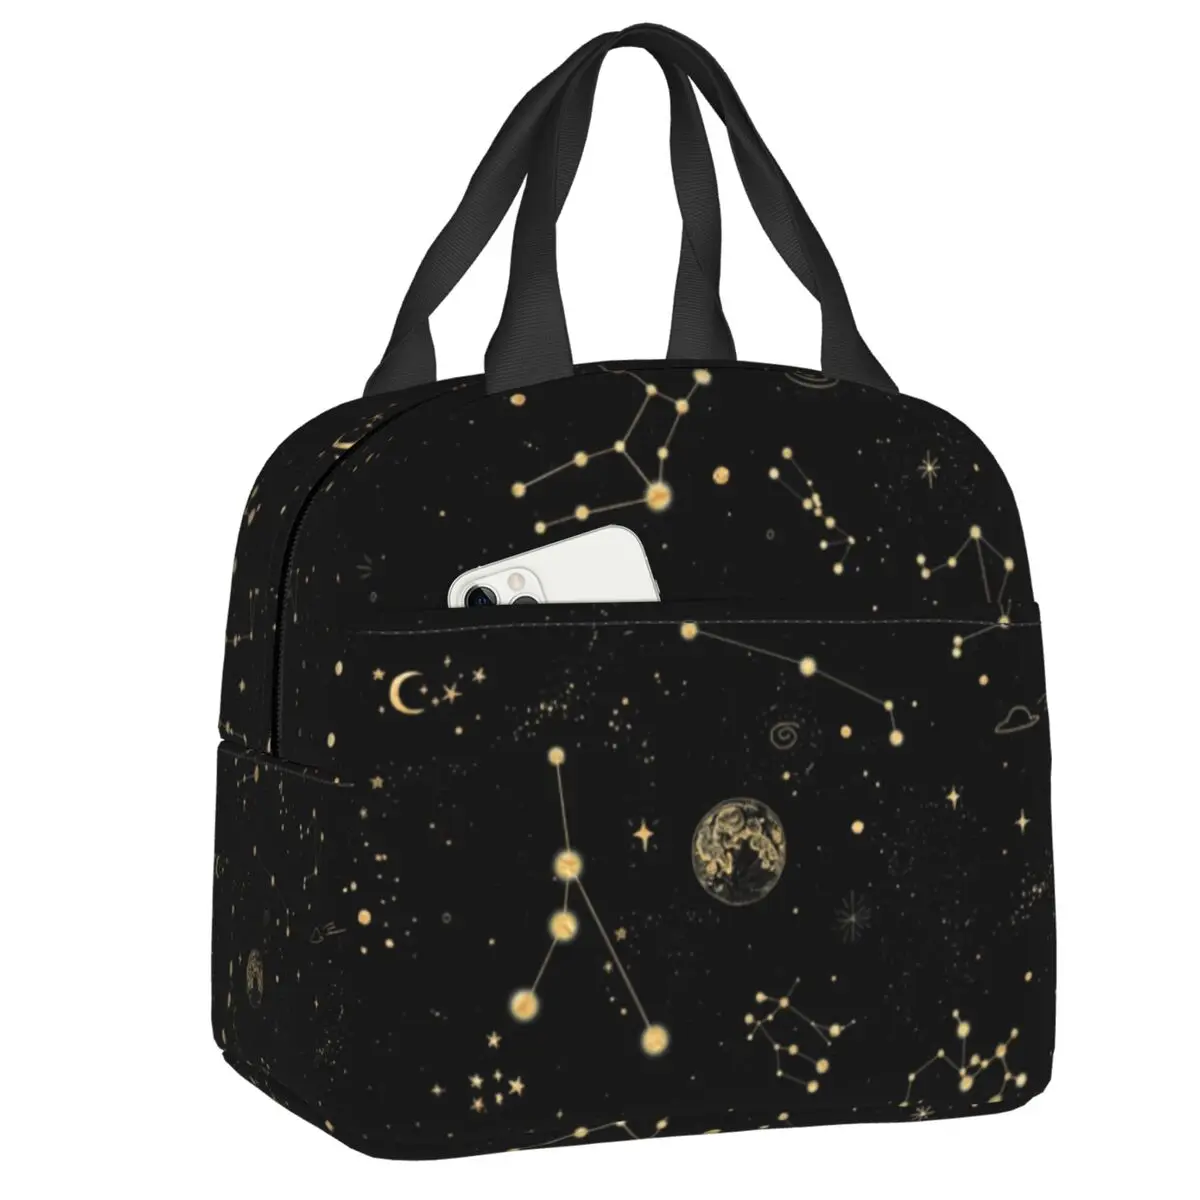 

Into The Galaxy Insulated Lunch Bag for Women Leakproof Space Constellation Thermal Cooler Bento Box Kids School Children